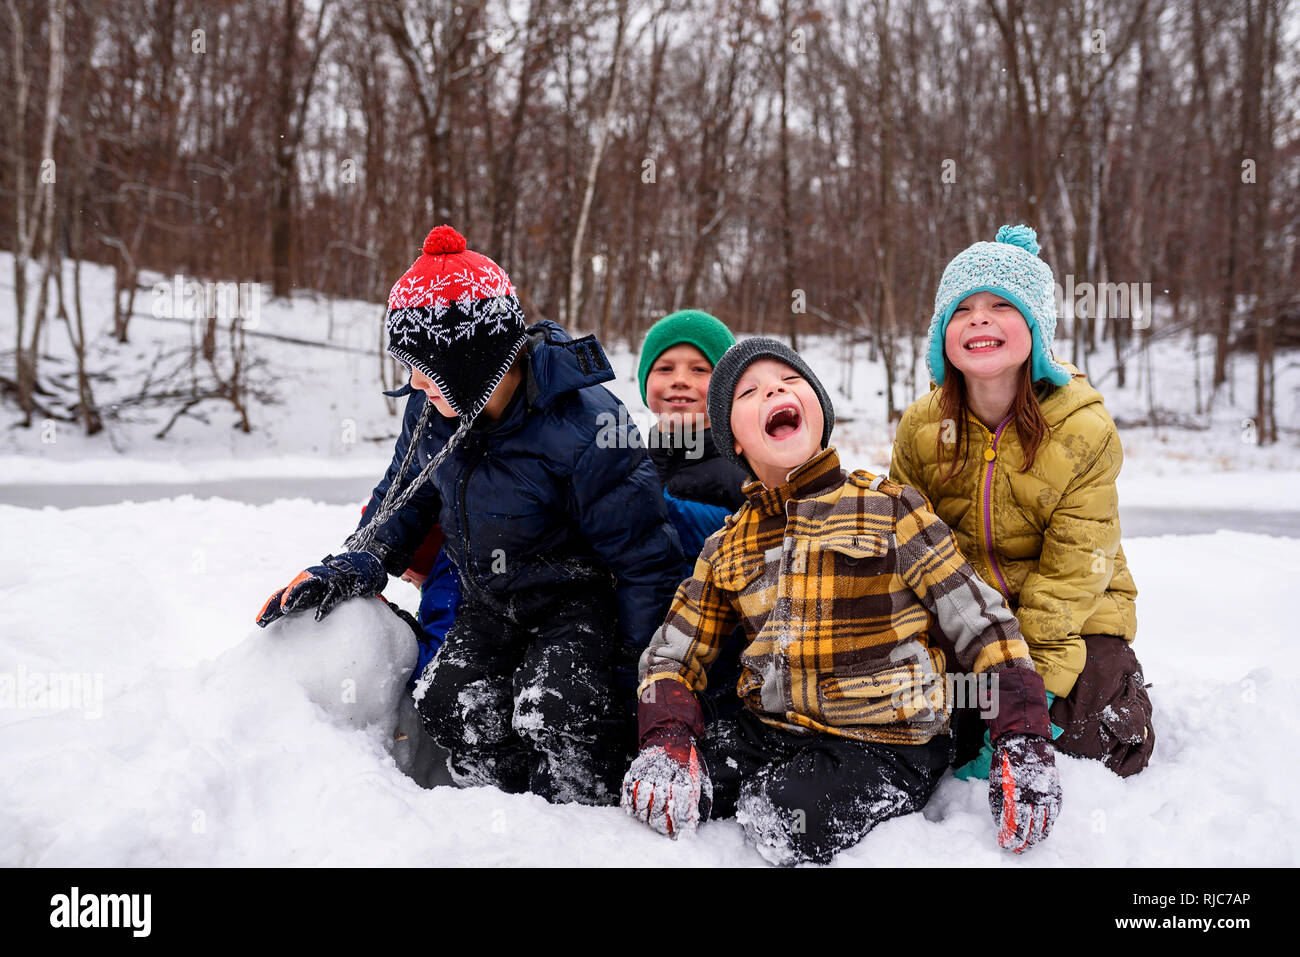 Four children sitting in the snow, Wisconsin, United States Stock Photo